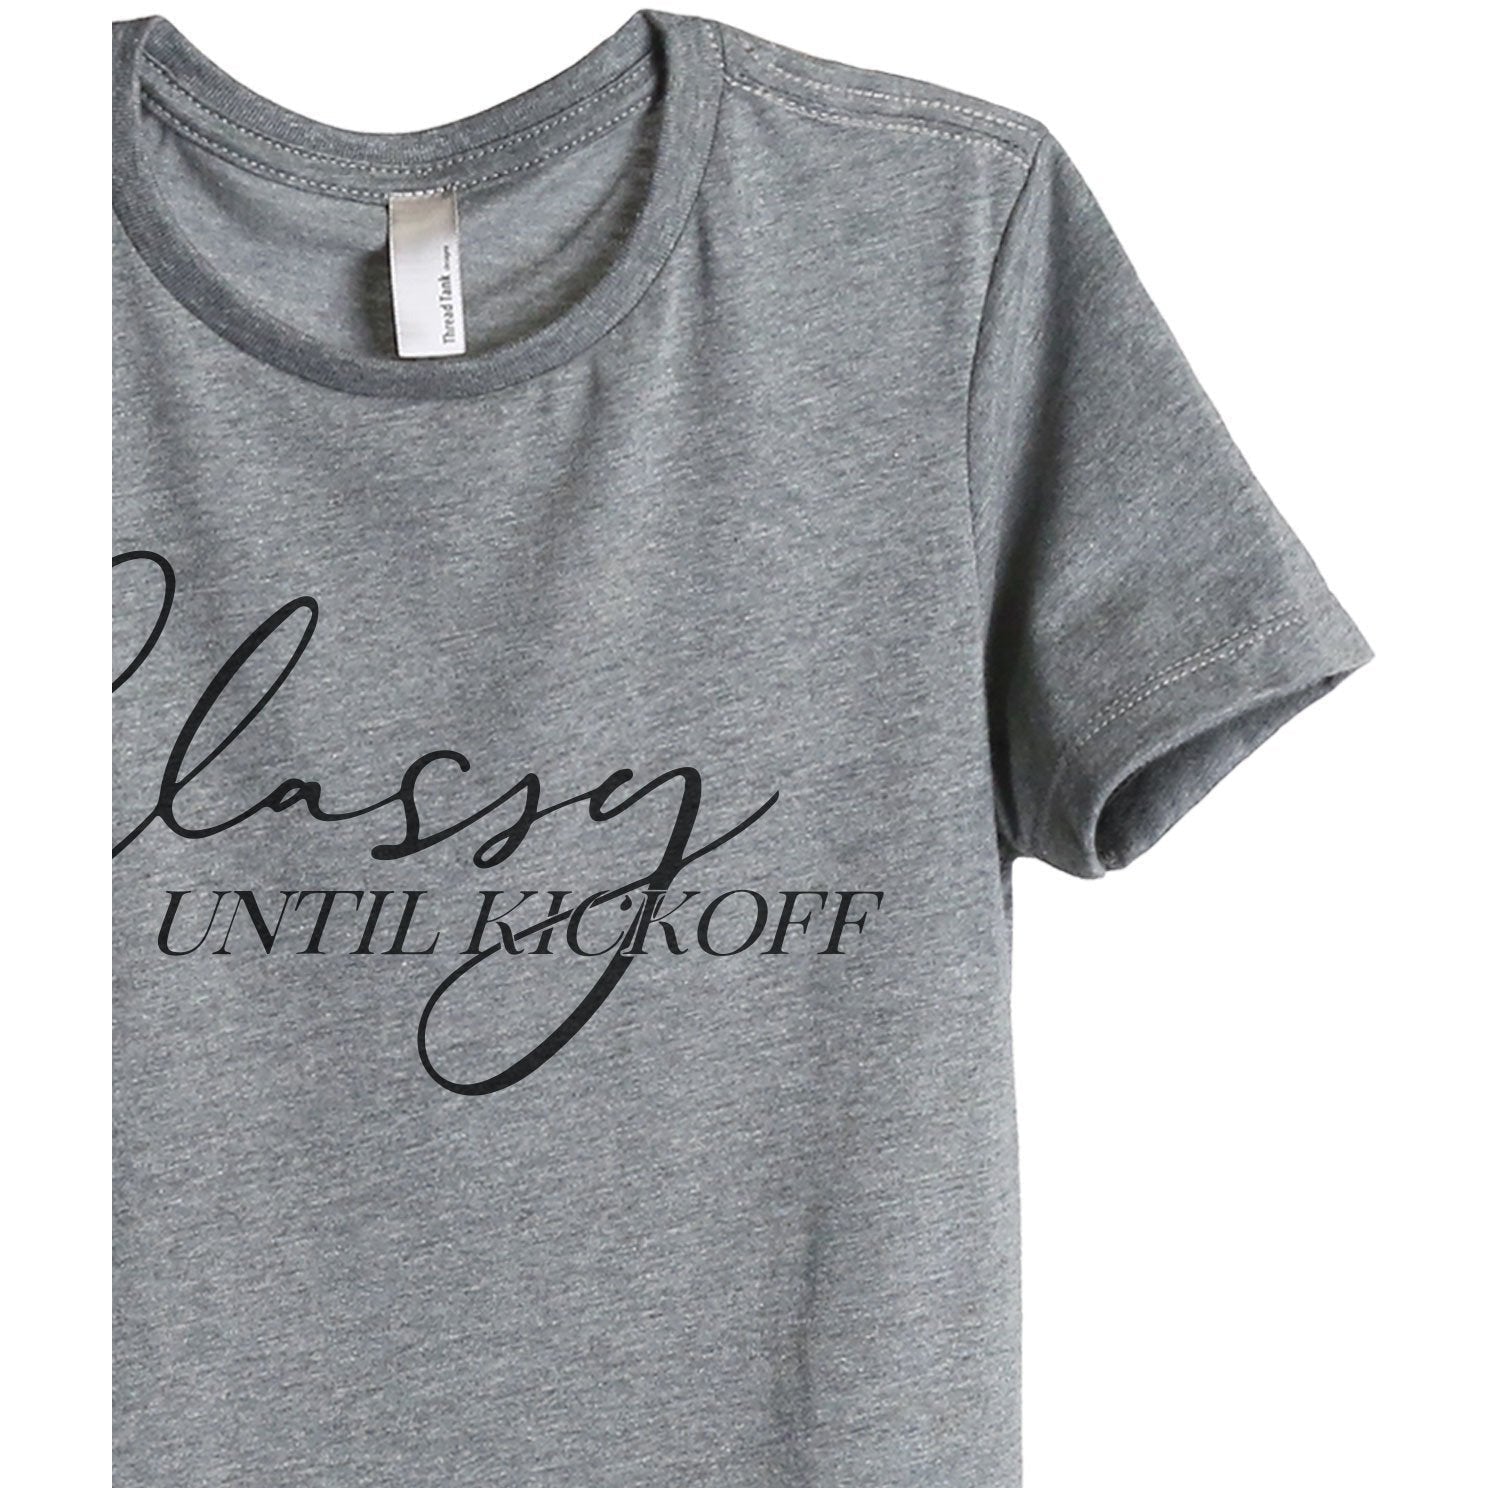 Classy Until Kickoff Women's Relaxed Crewneck T-Shirt Top Tee Heather Grey Zoom Details
